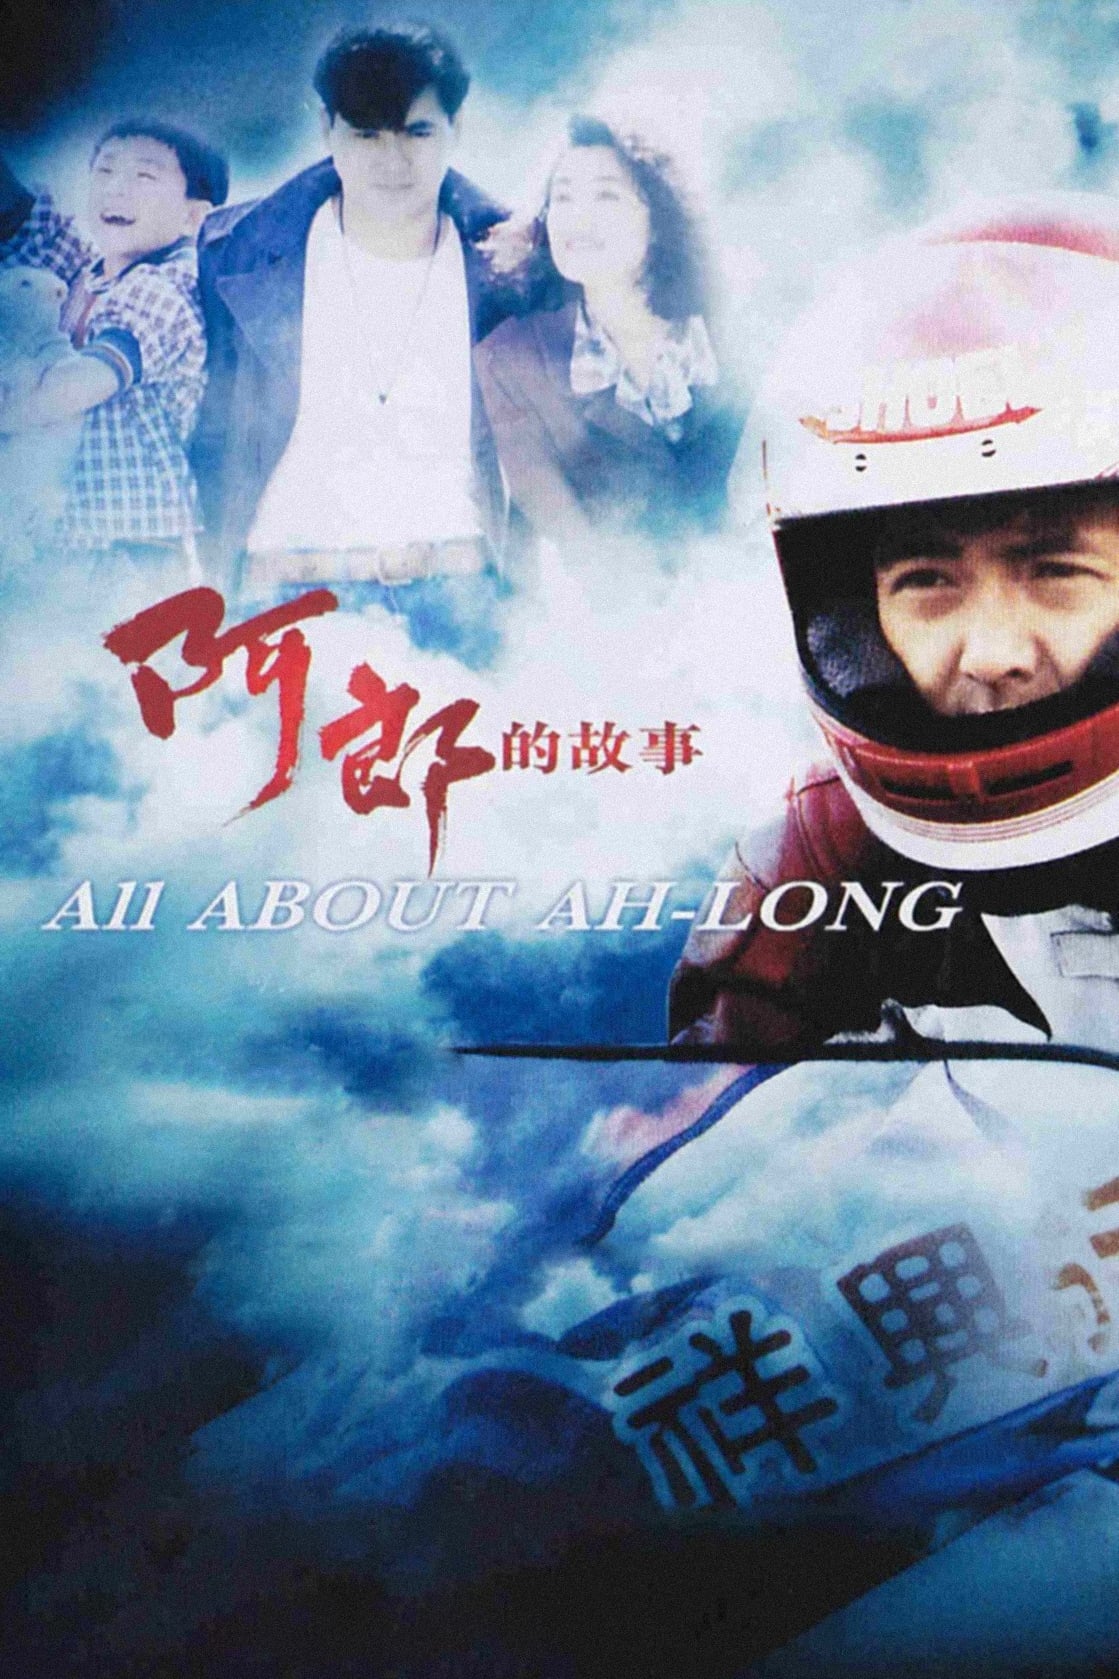 All About Ah-Long (1989)